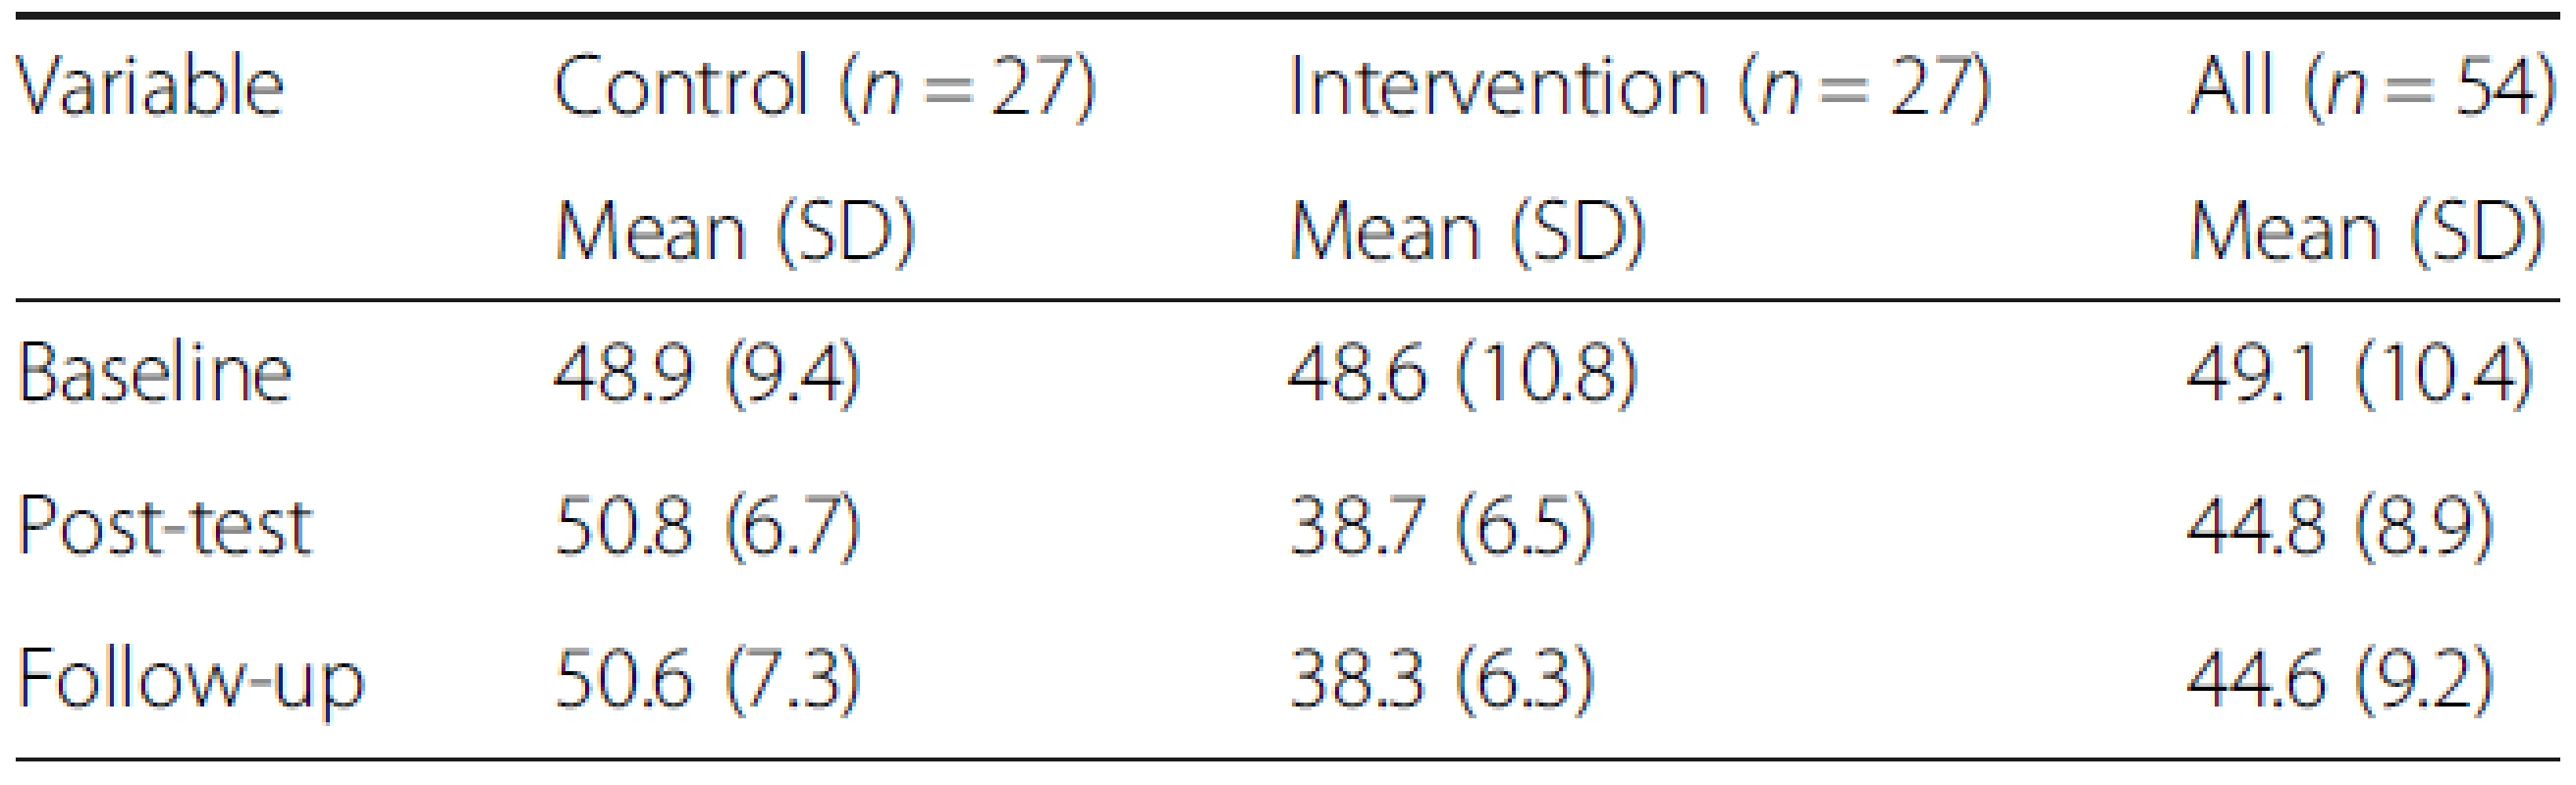 Mean and standard deviation (SD) for FQ scores at each time point